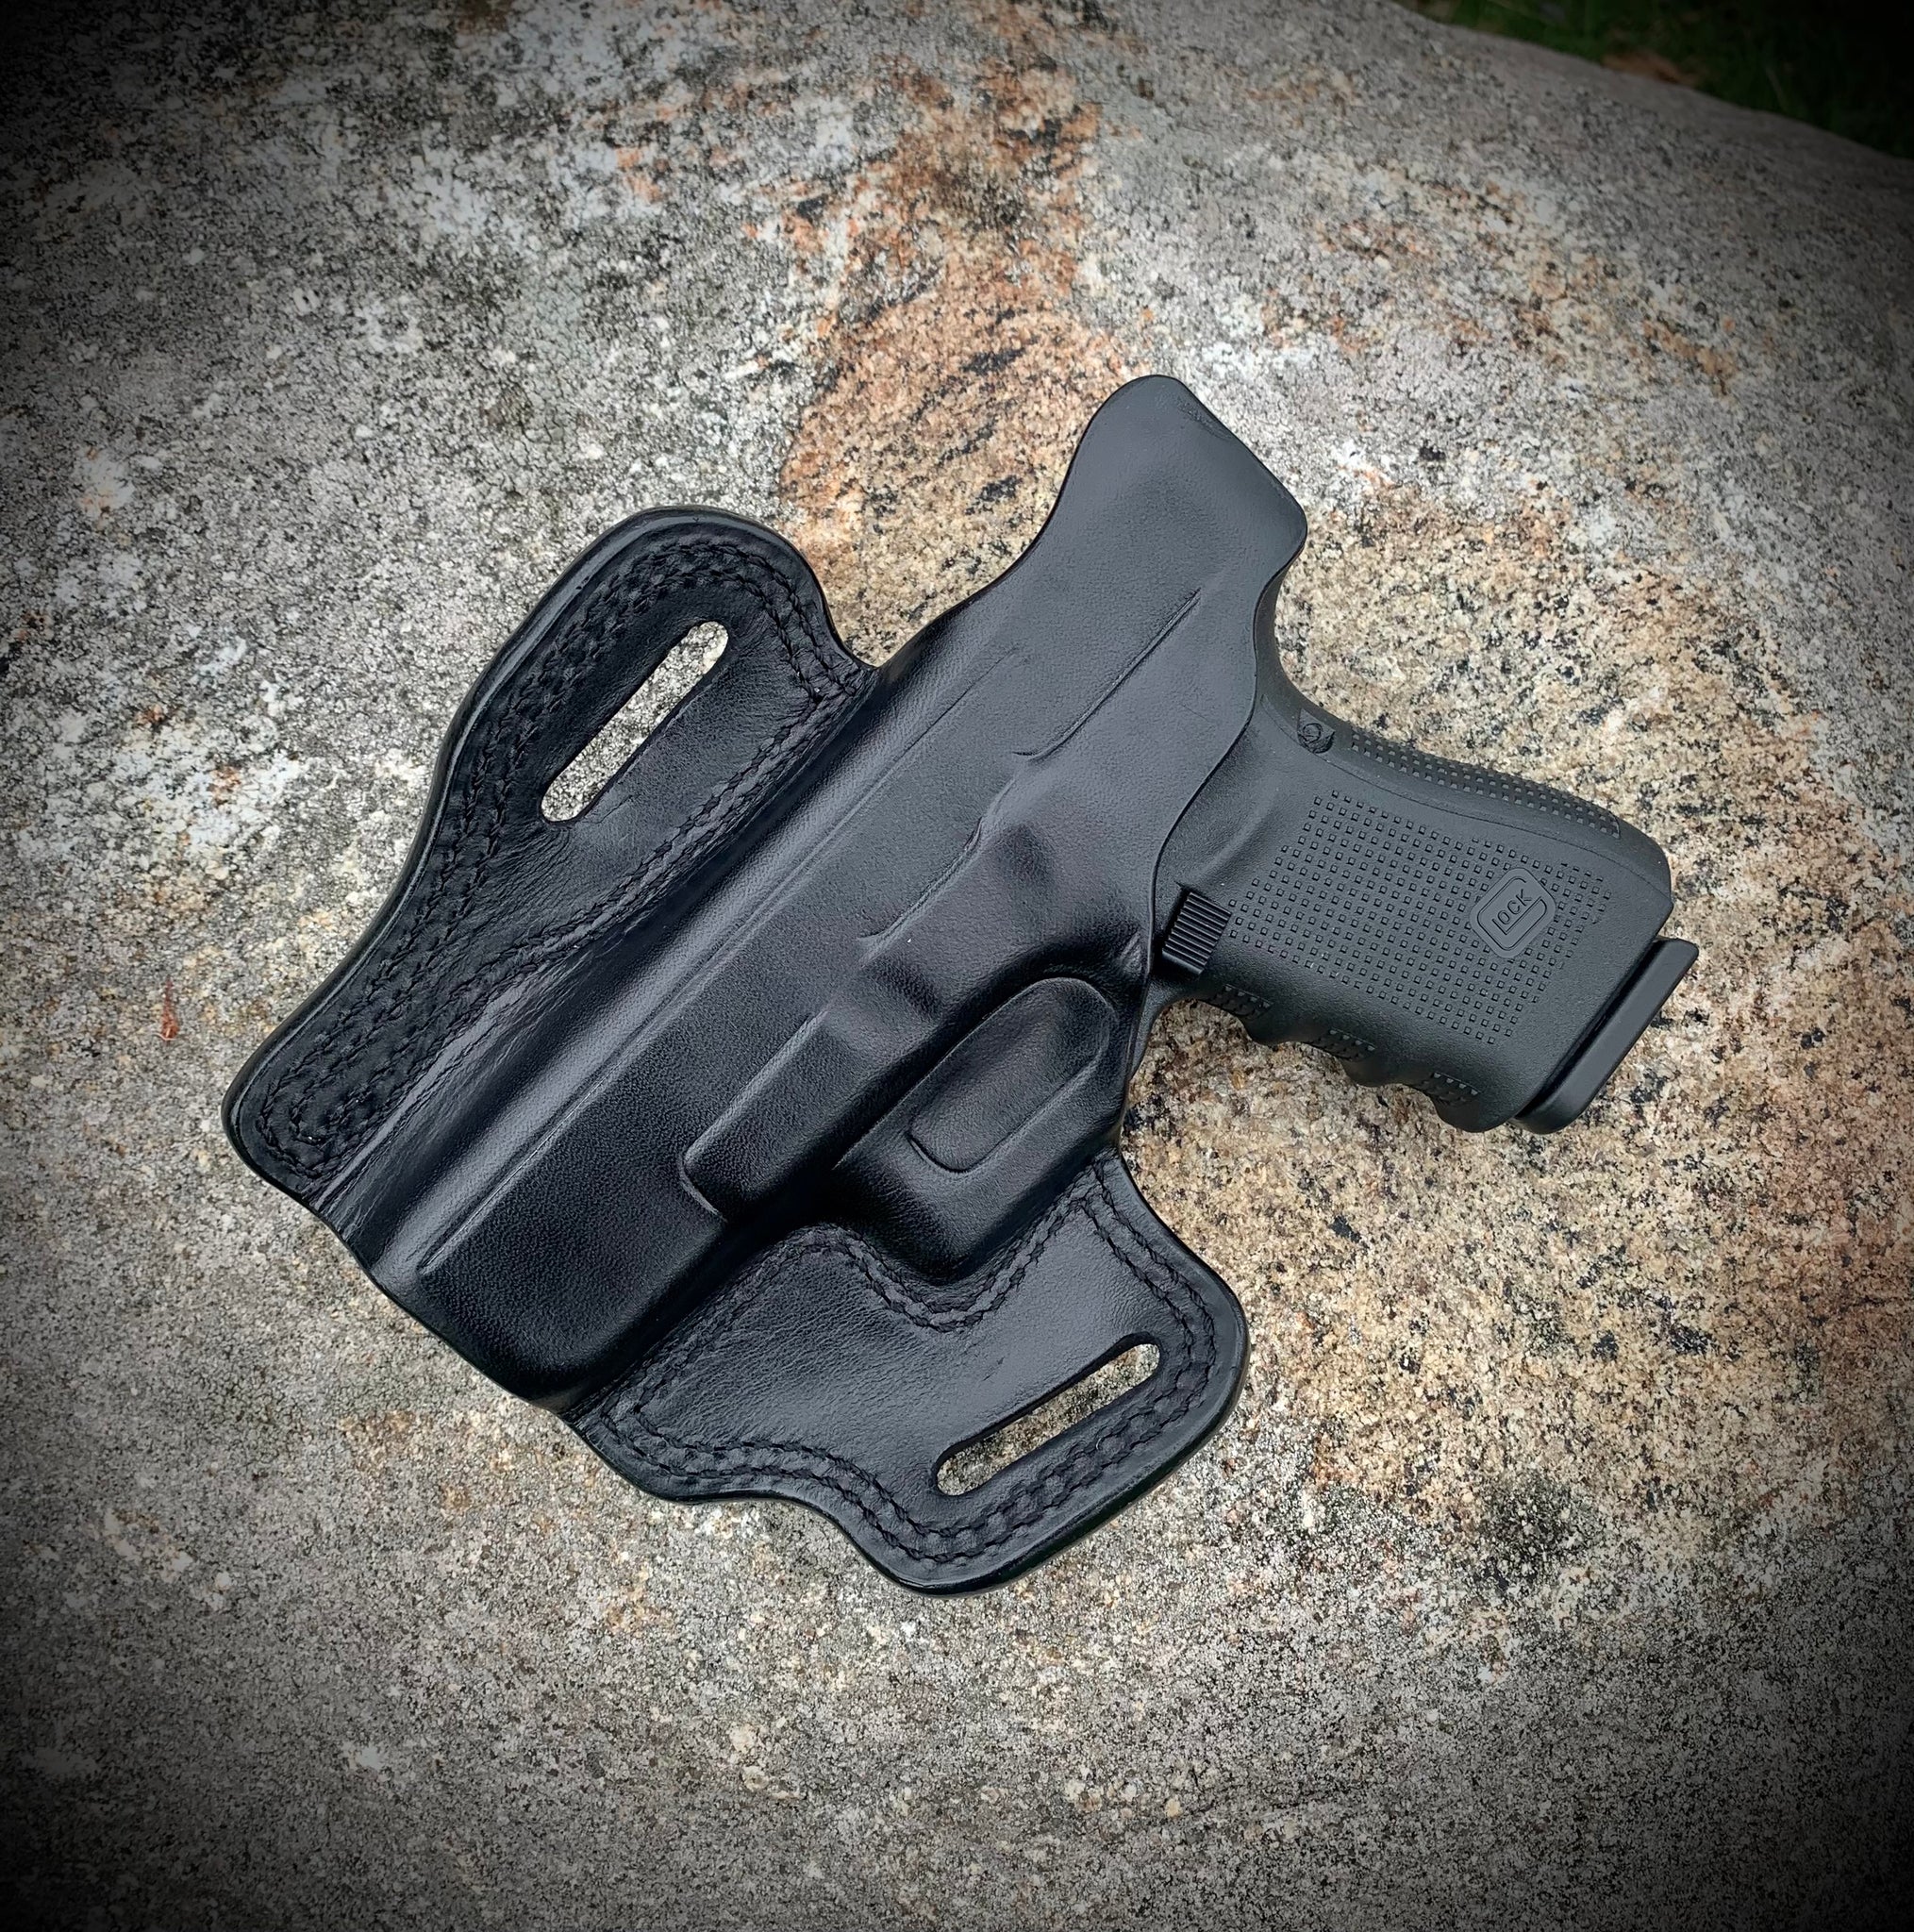 GLOCK 19 OWB Holster with Shark